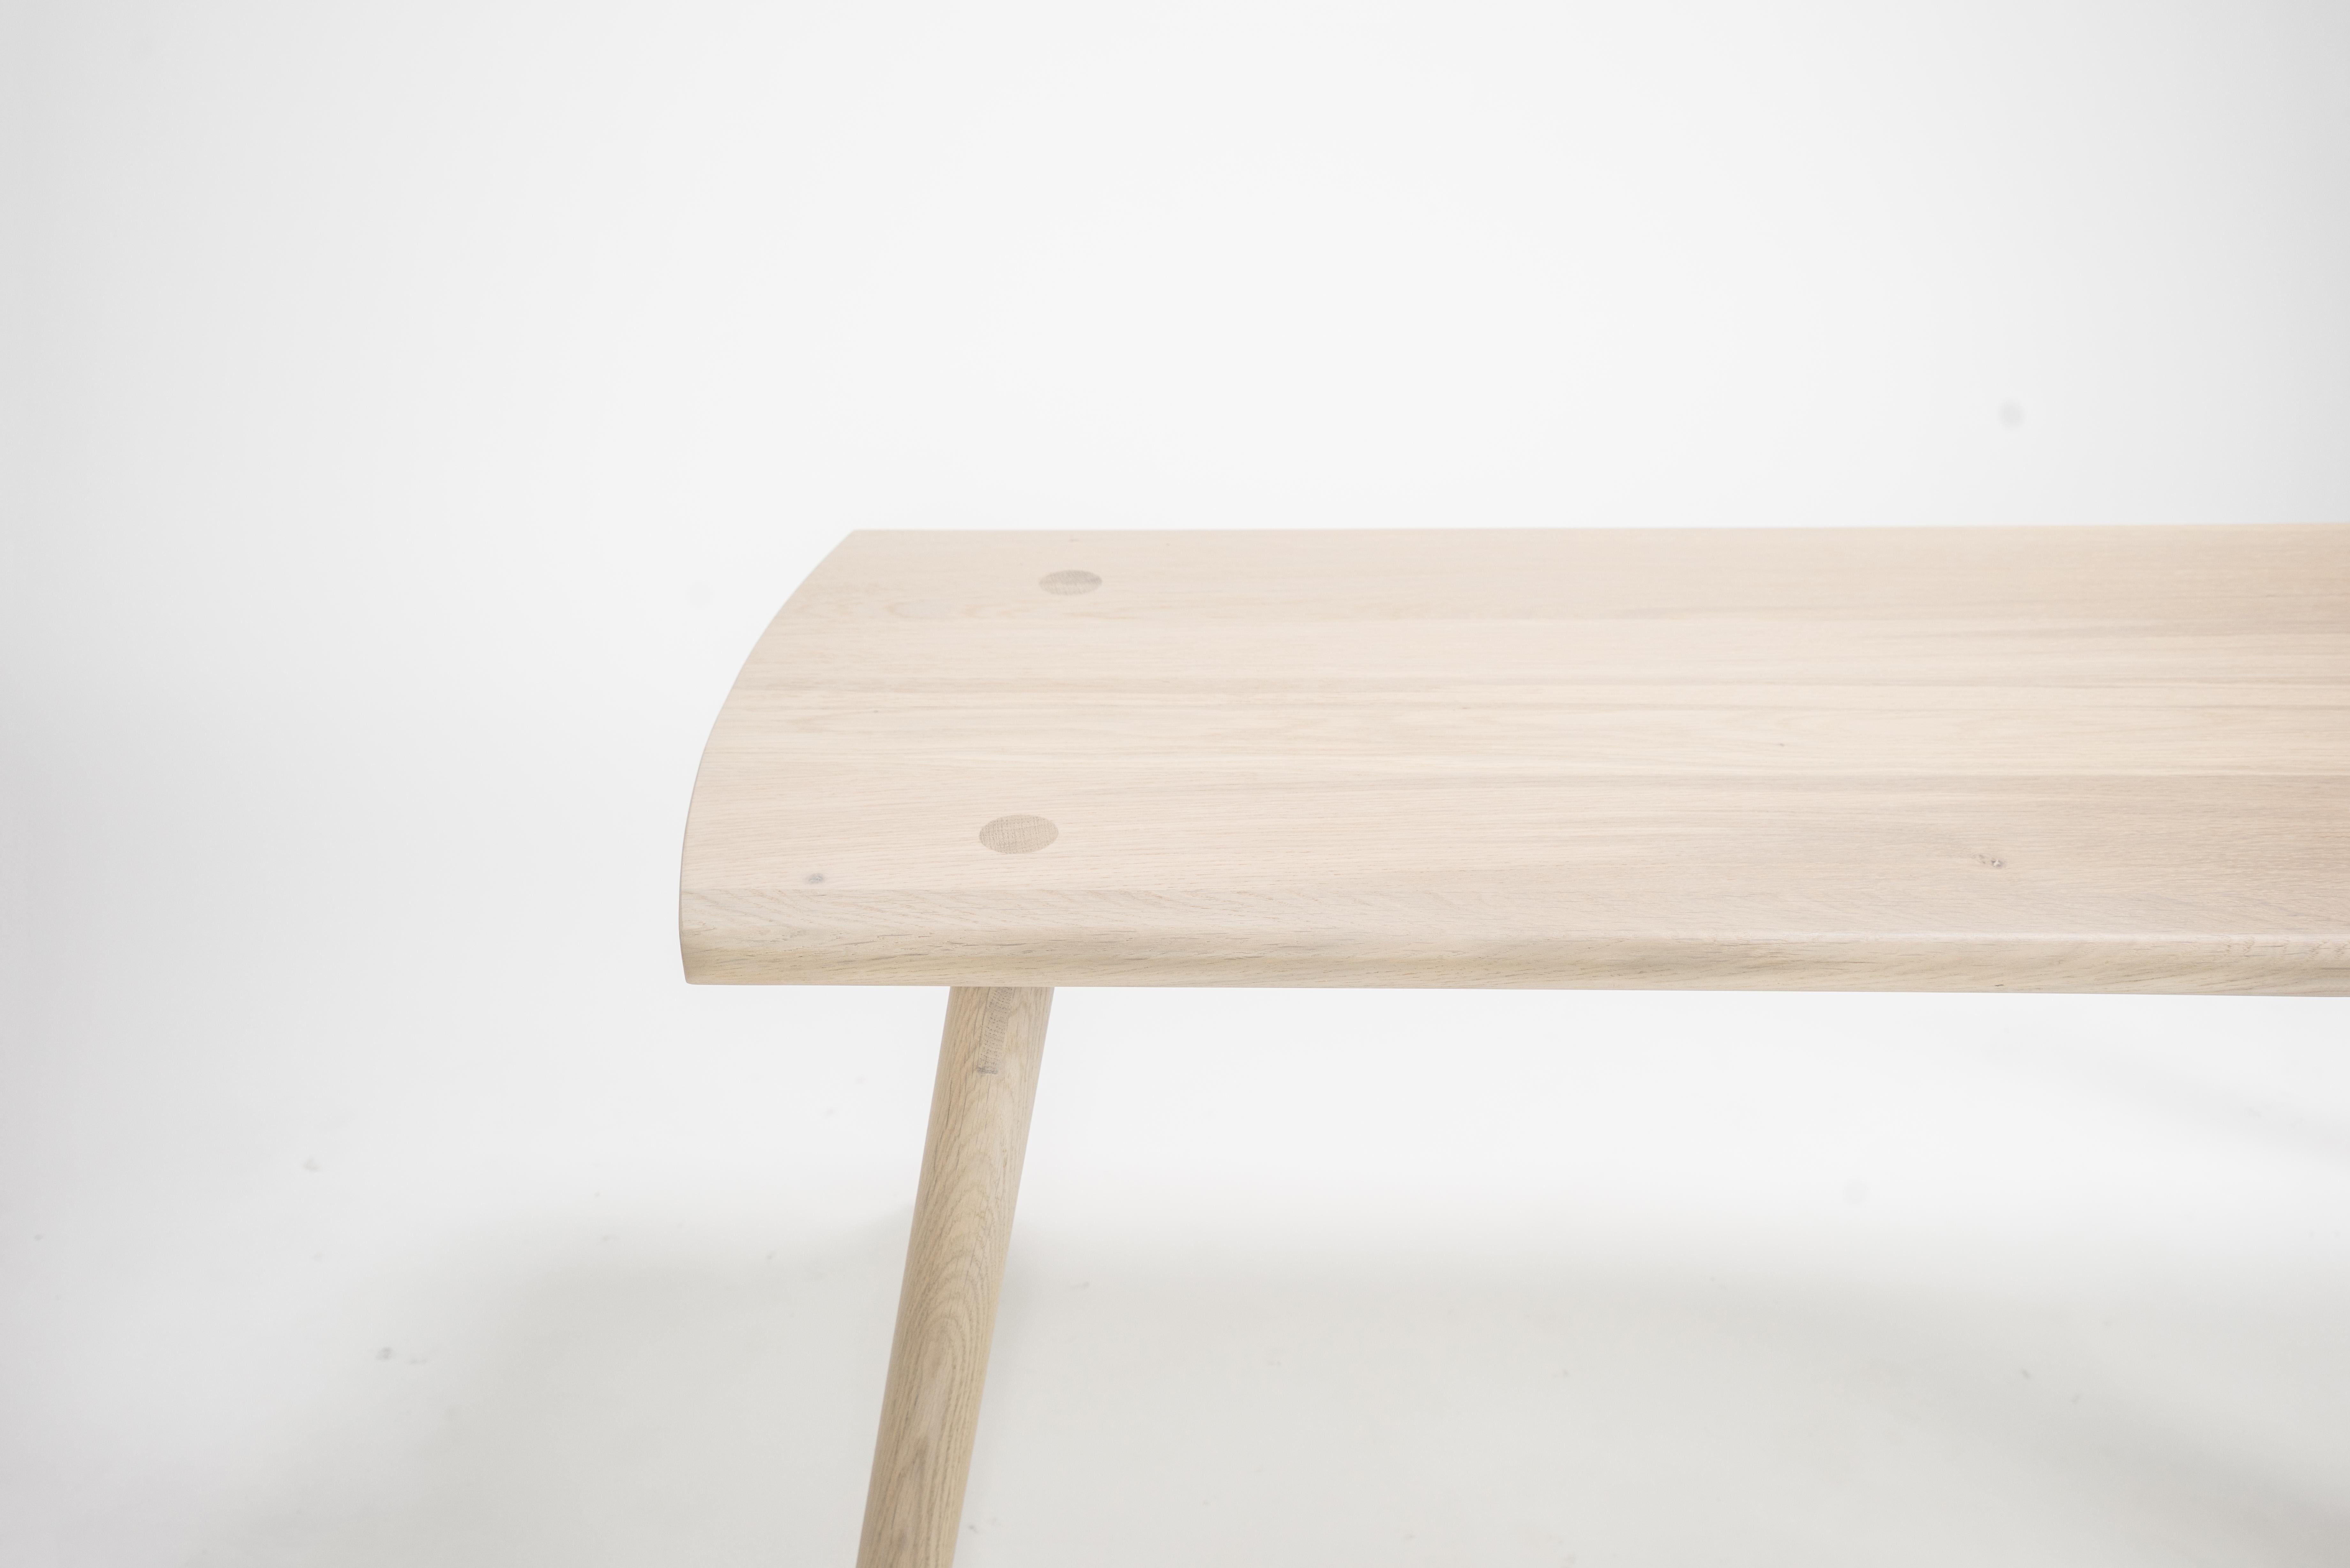 Chinese Sol Bench by Sun at Six, Nude Minimalist Bench in Oak Wood For Sale